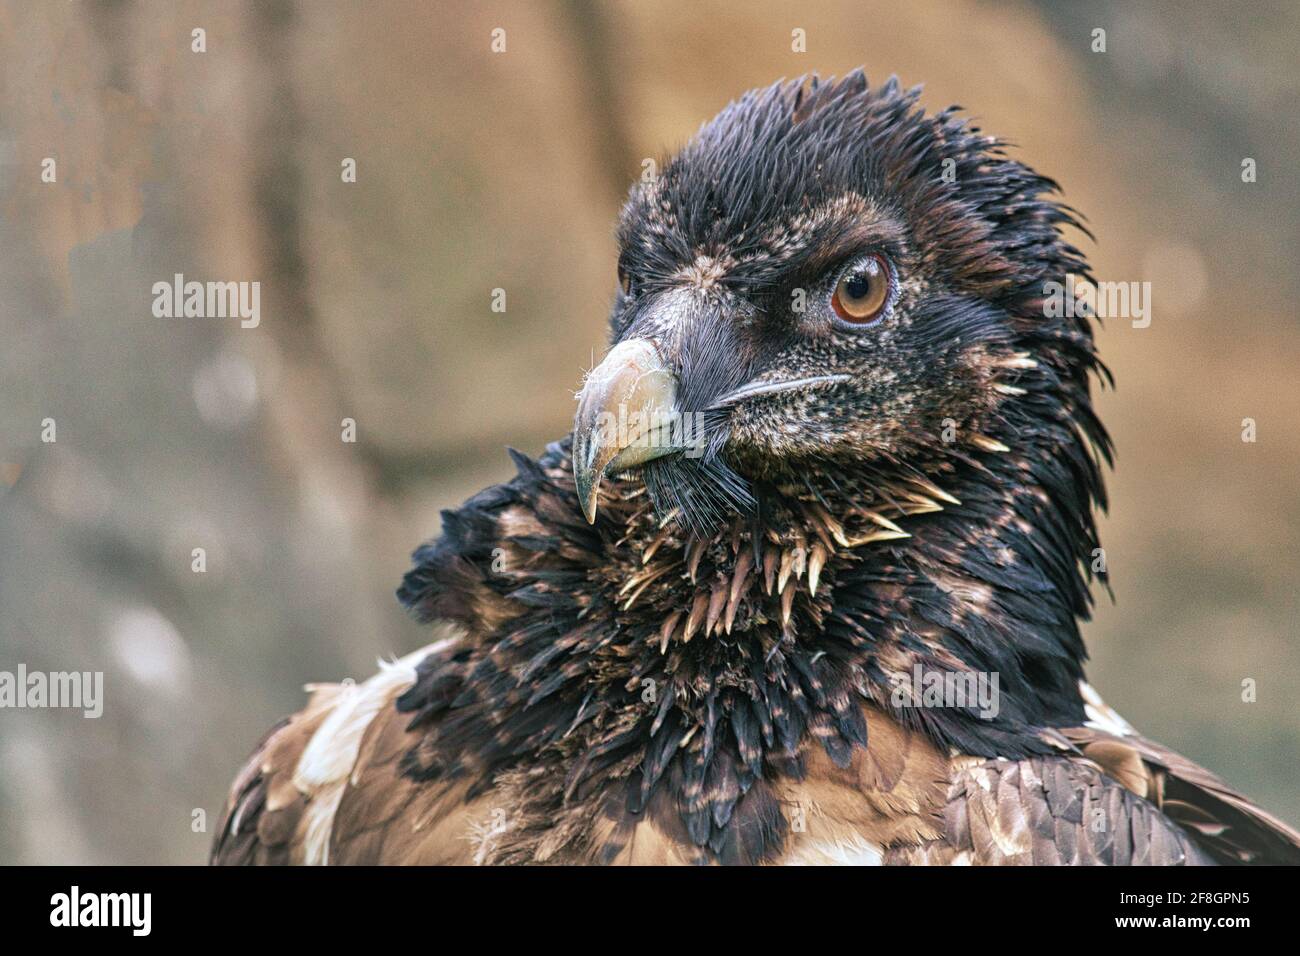 A vulture portrai from the Berlin Zoo. Very expressive this bird. Stock Photo